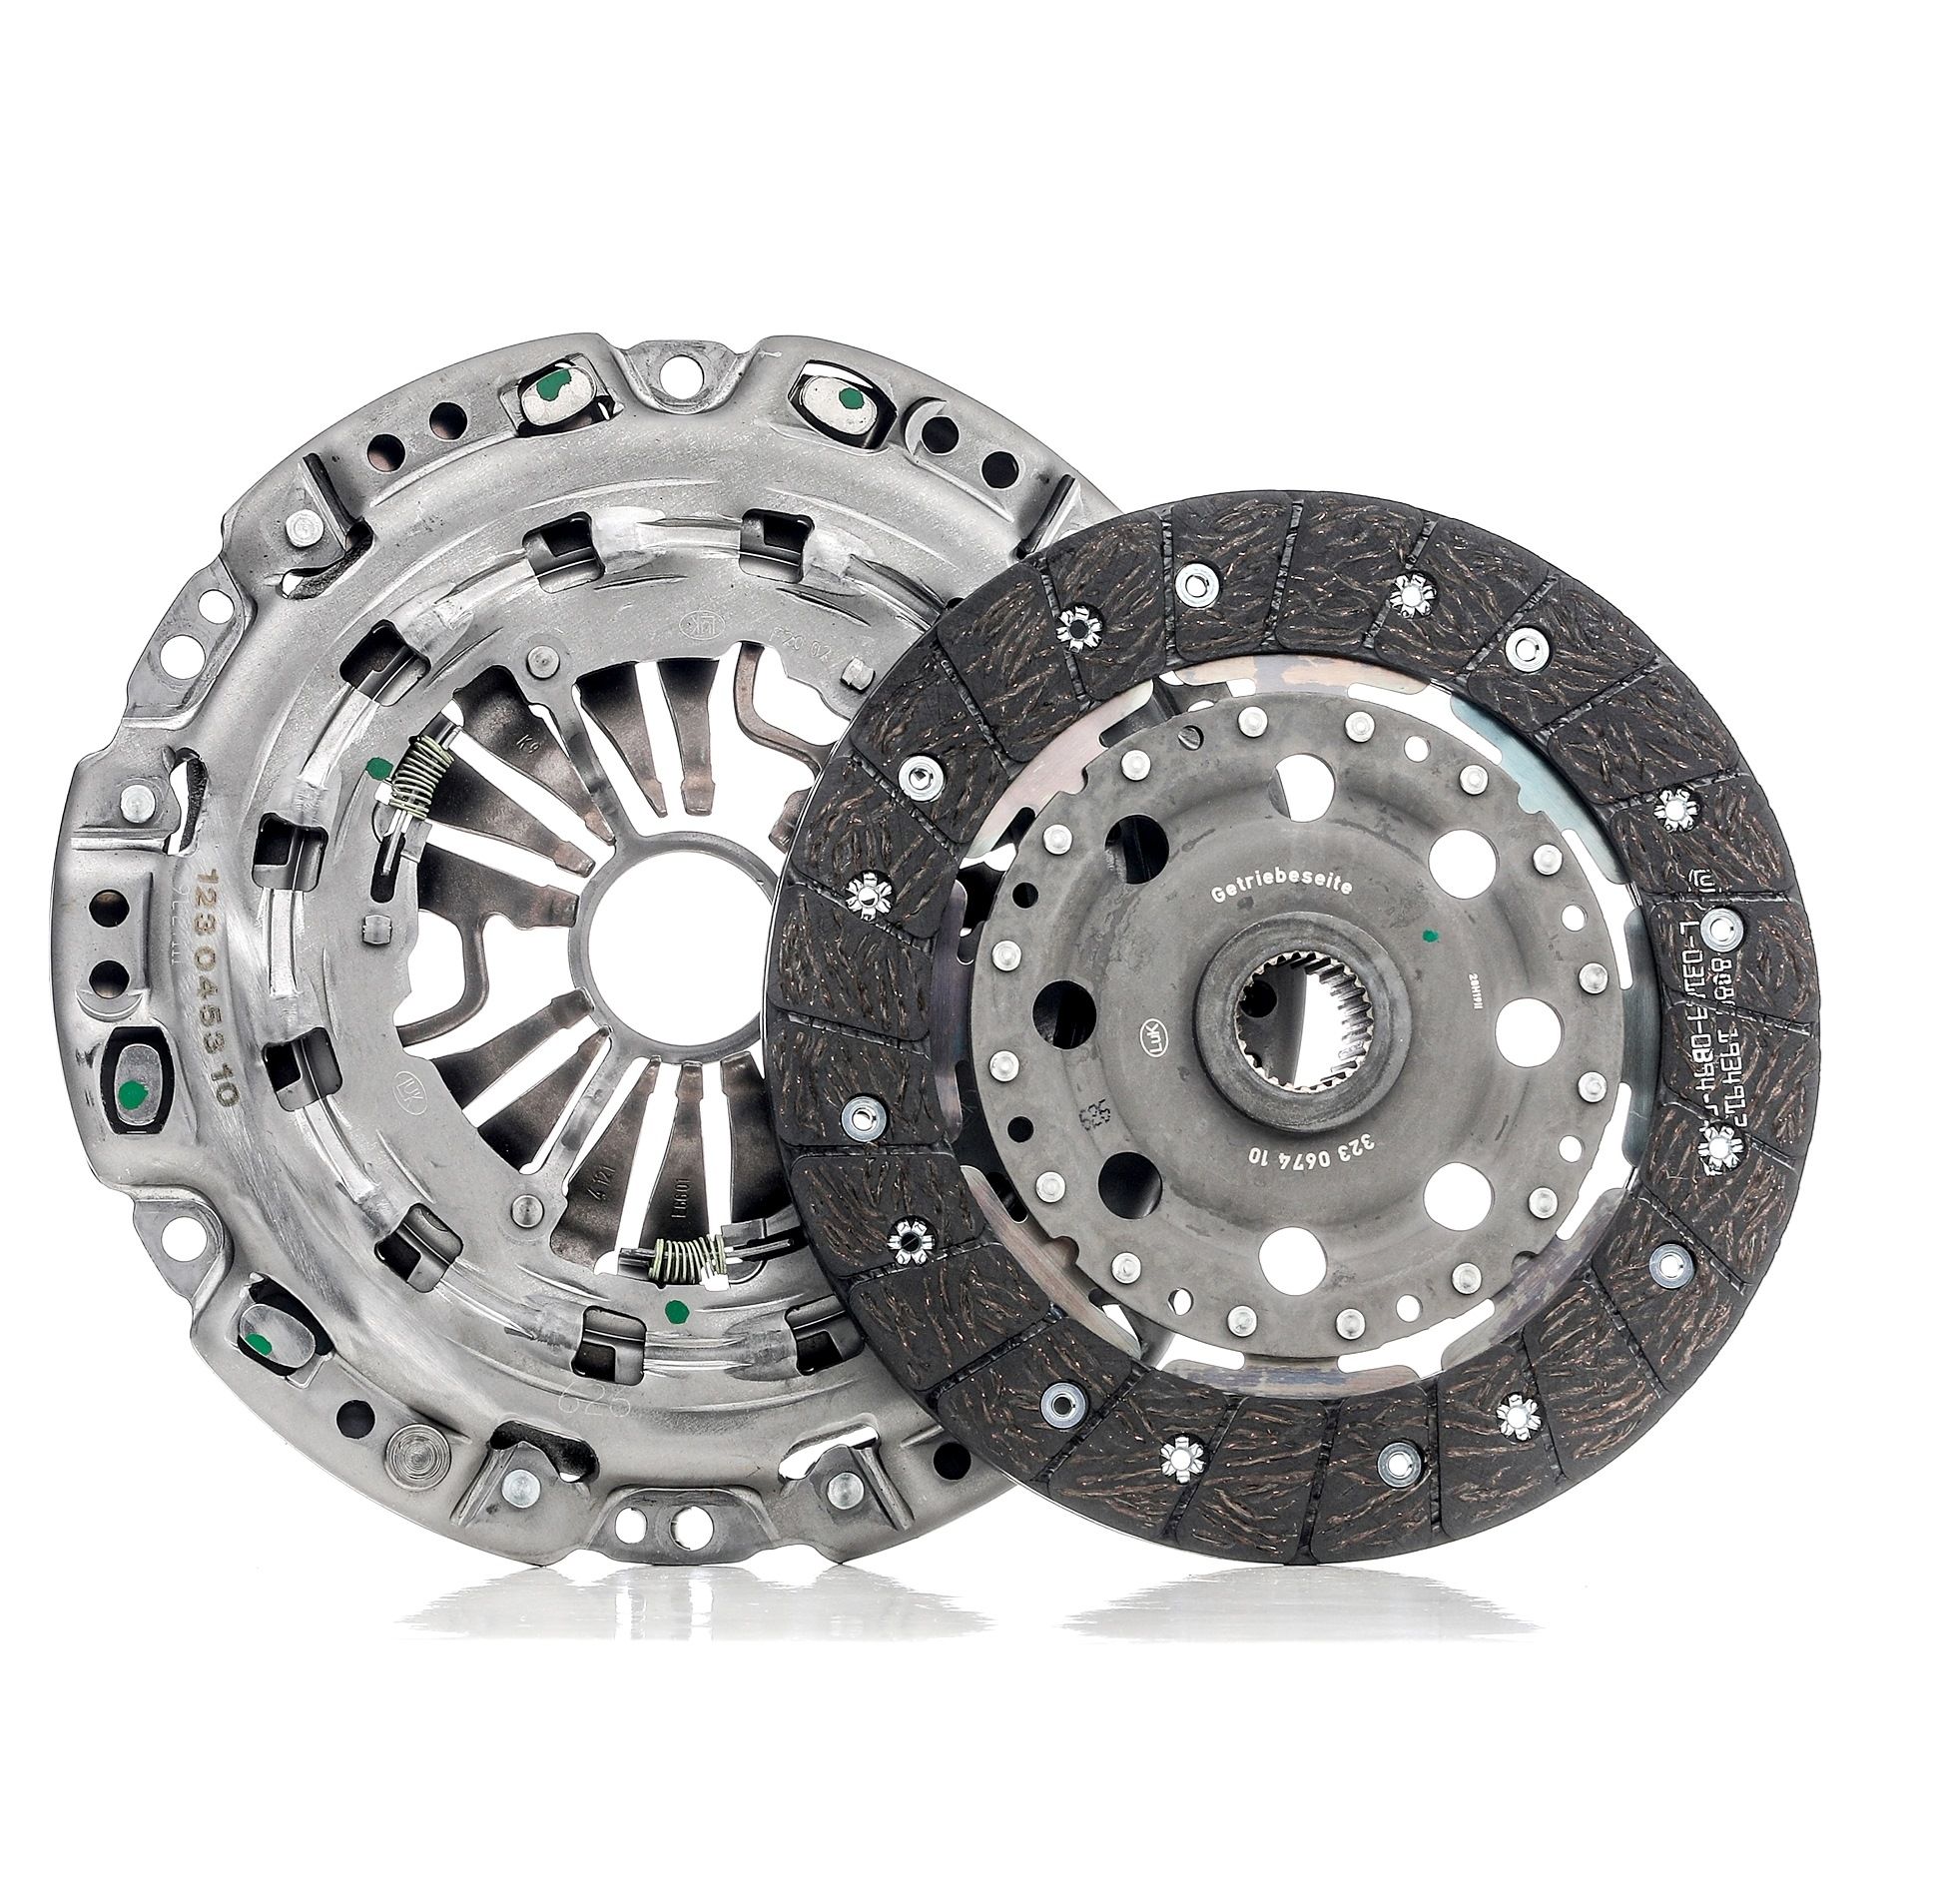 623 3215 19 LuK Clutch set MERCEDES-BENZ for engines with dual-mass flywheel, with clutch disc, without clutch release bearing, Requires special tools for mounting, Check and replace dual-mass flywheel if necessary., with automatic adjustment, 230mm